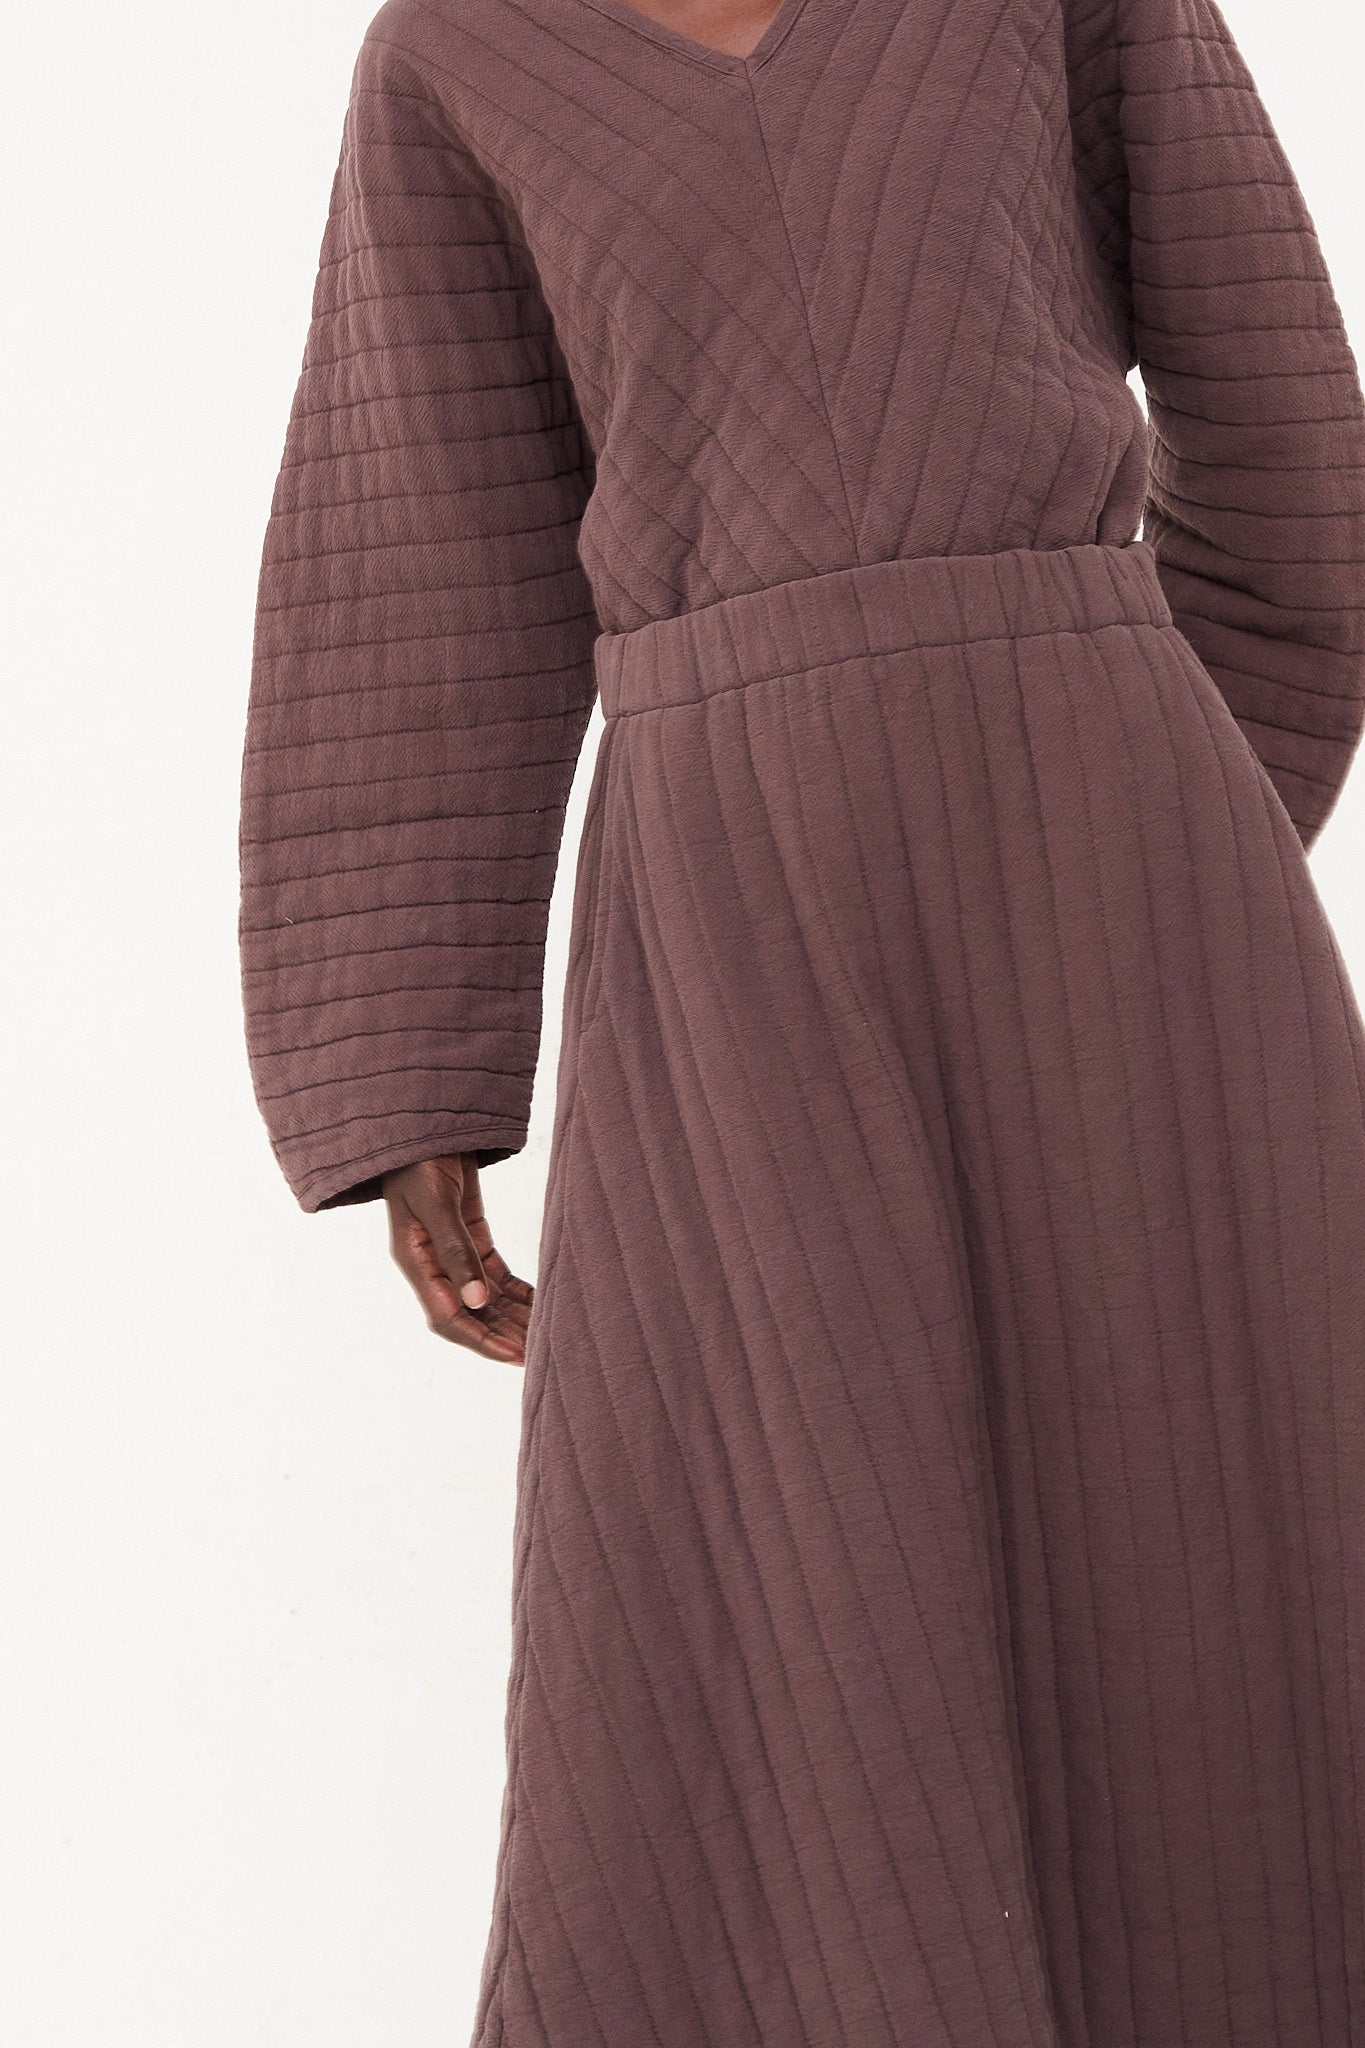 The model is wearing a plum quilted skirt with an elasticated waist, from Black Crane.